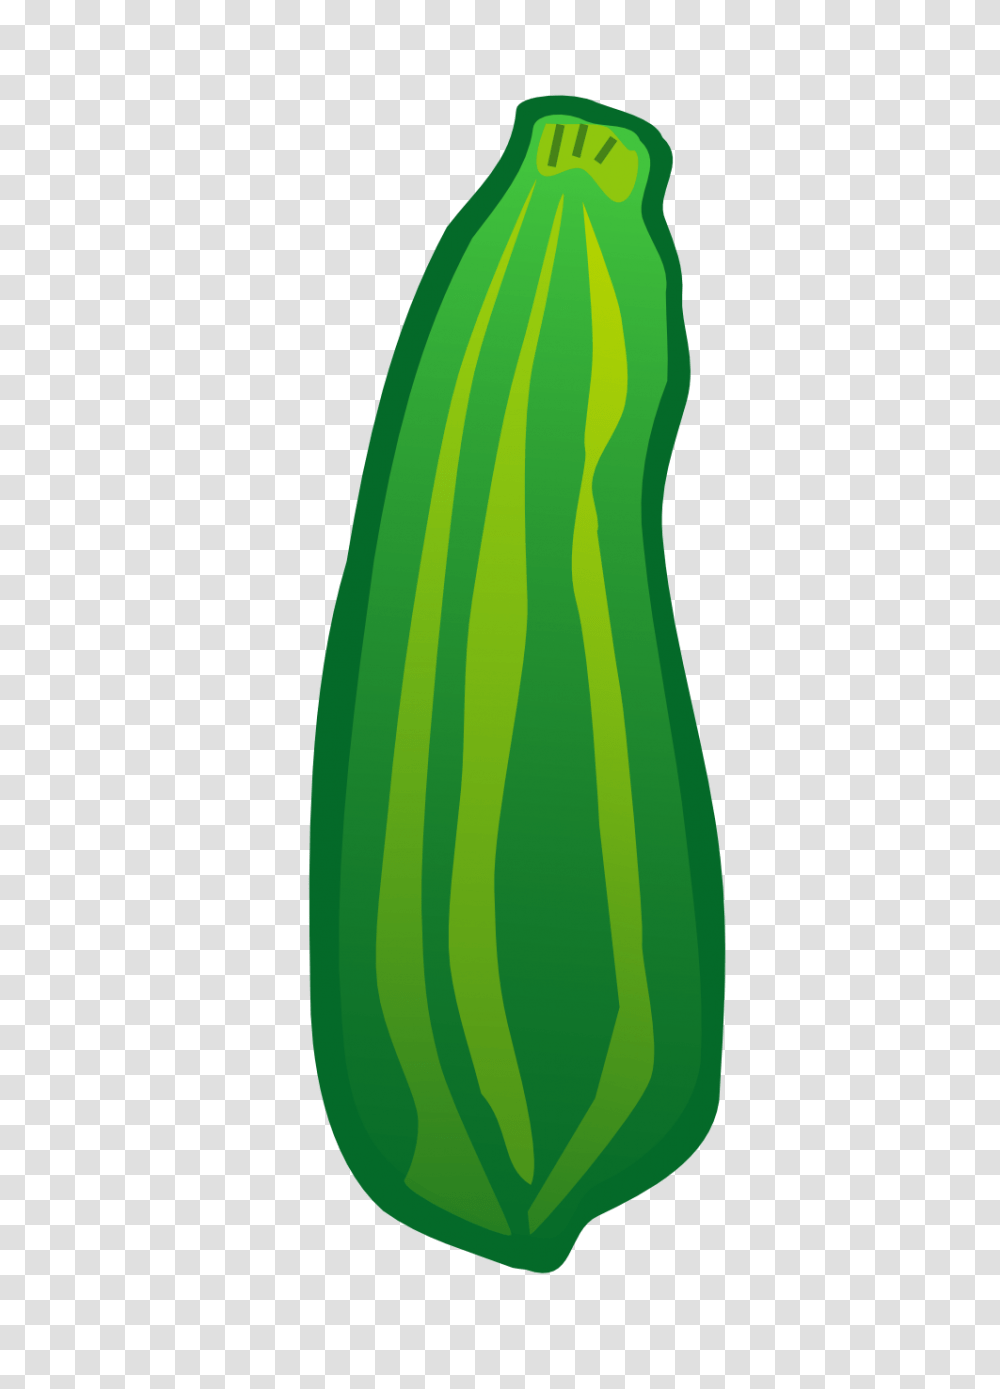 Pictures Of Zucchini Plant Clip Art, Cucumber, Vegetable, Food, Produce Transparent Png